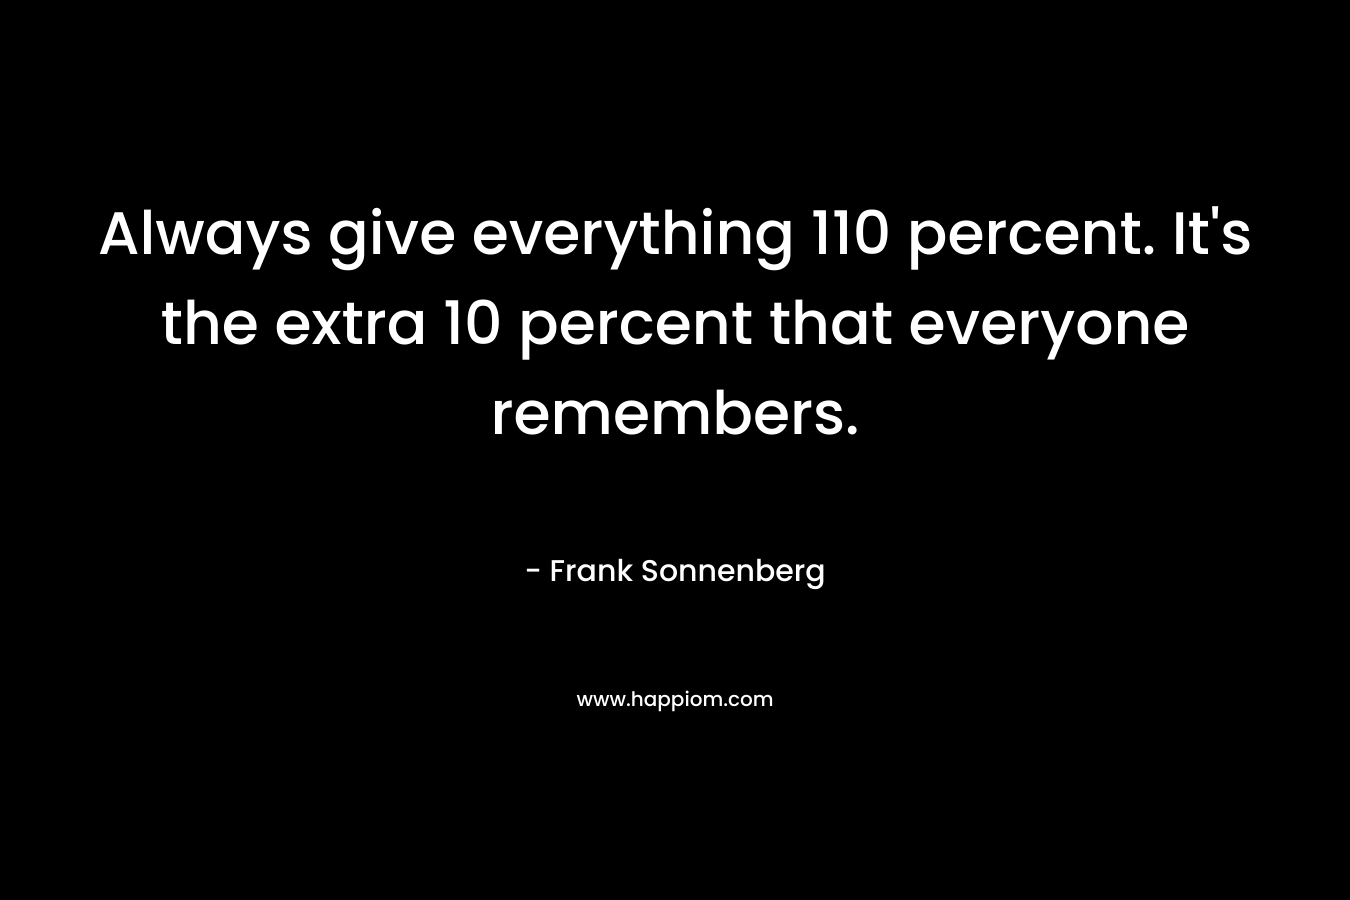 Always give everything 110 percent. It’s the extra 10 percent that everyone remembers. – Frank Sonnenberg